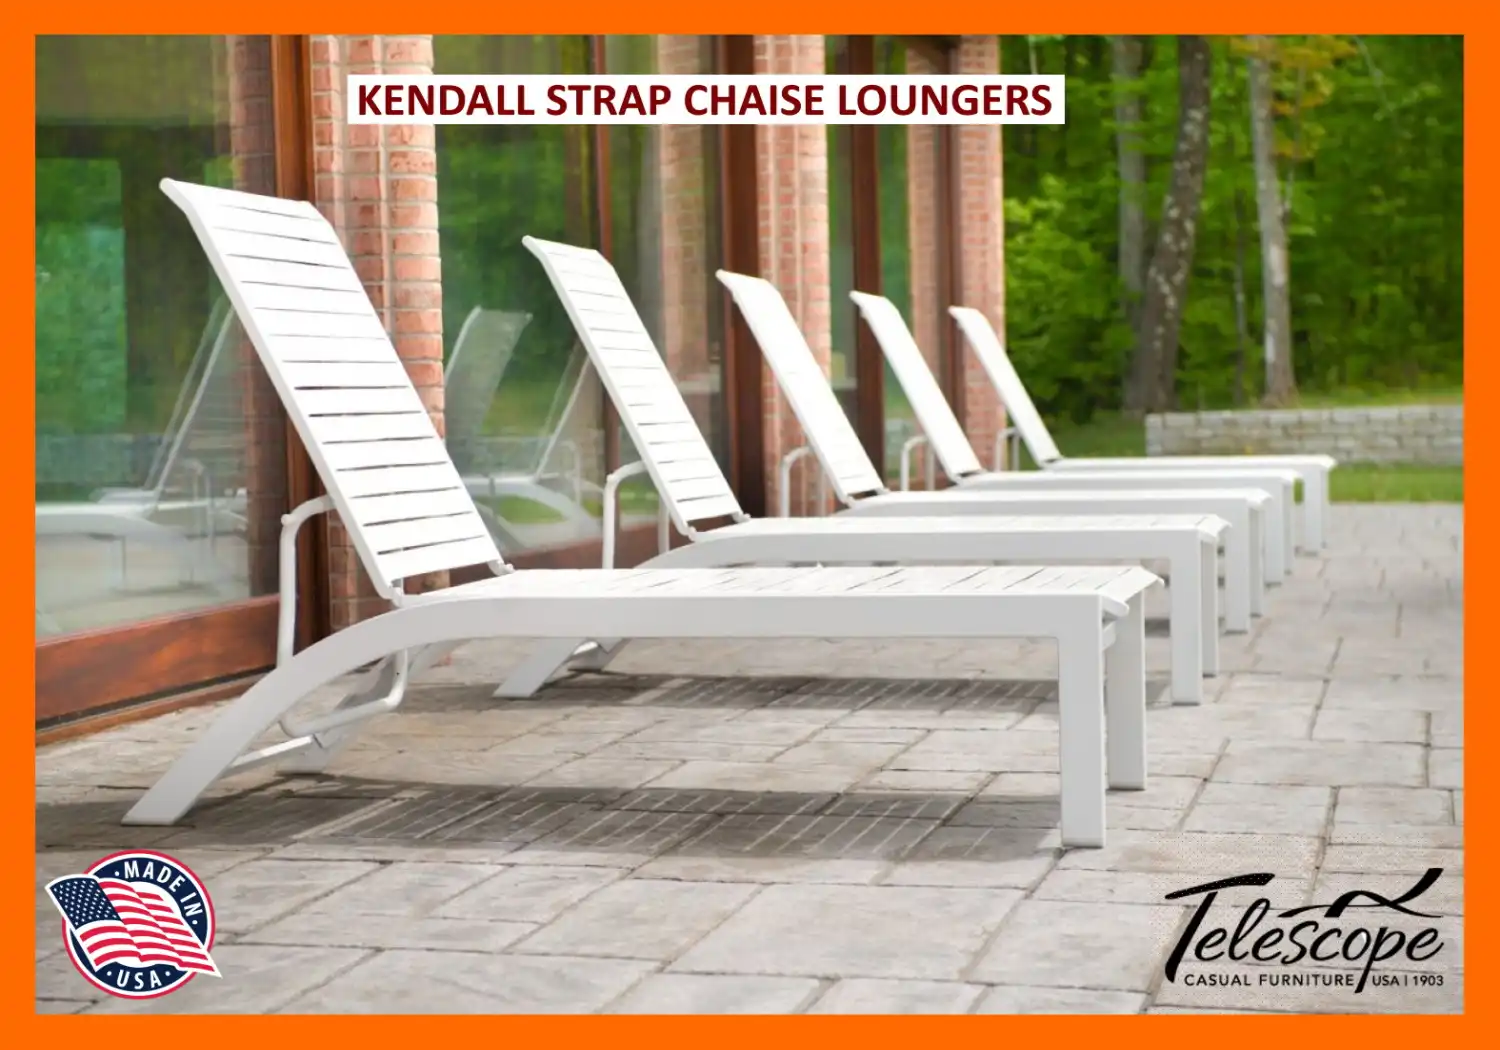 KENDALL STRAP CHAISE LOUNGERS